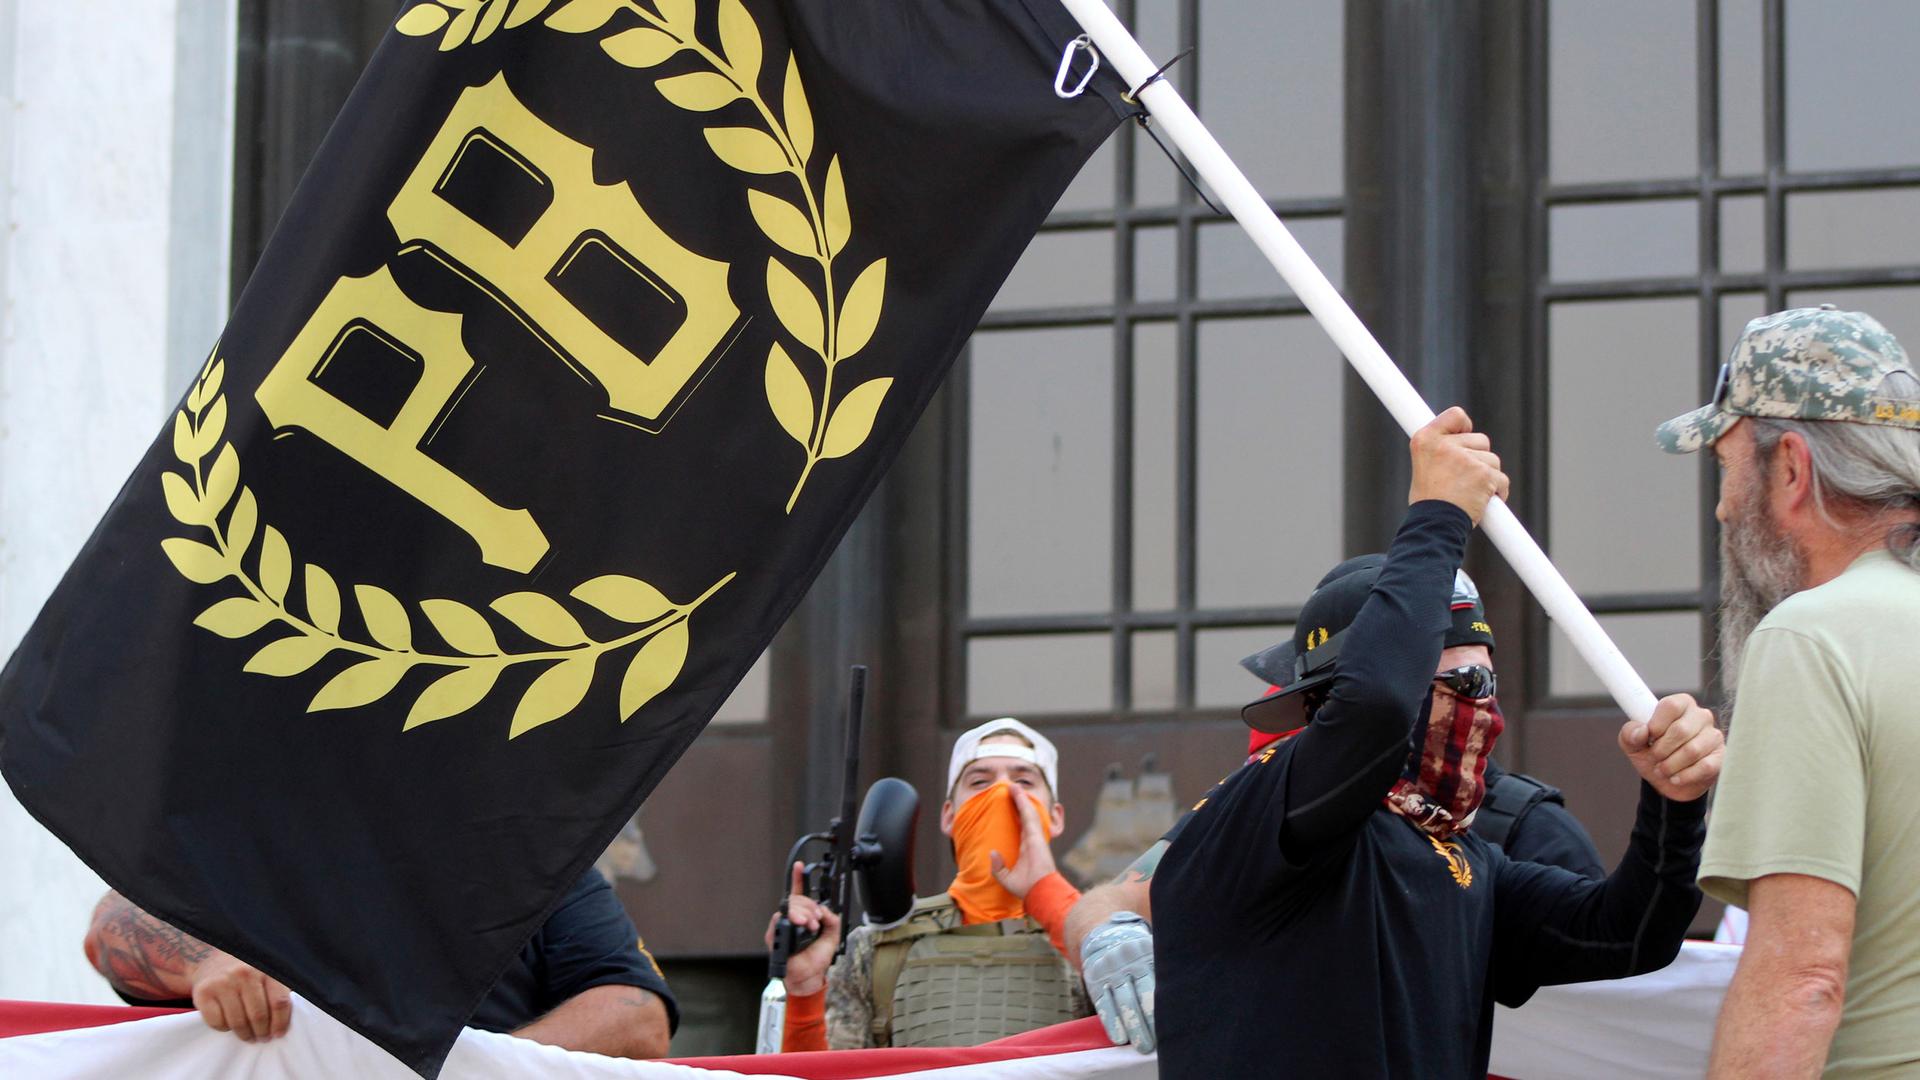 A man is shown wearing a face covering and holding a black flag with gold lettering with the letters P and B on it.